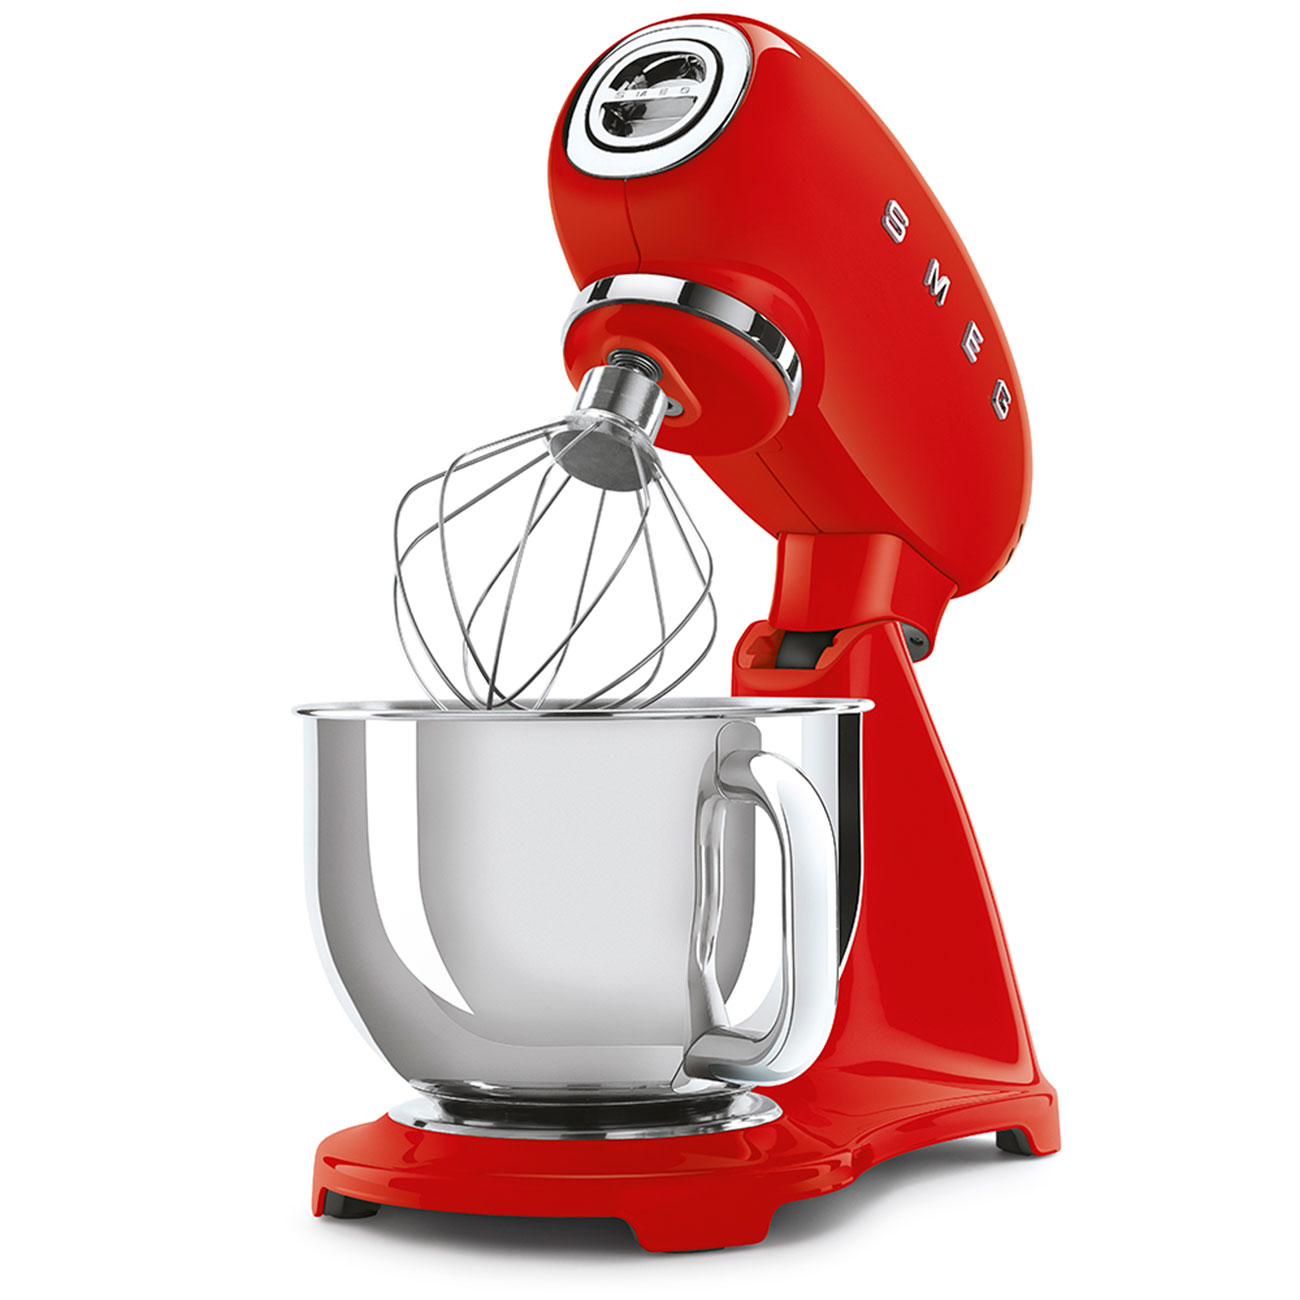 Red Stand mixer full color SMF03RDUK Smeg_2